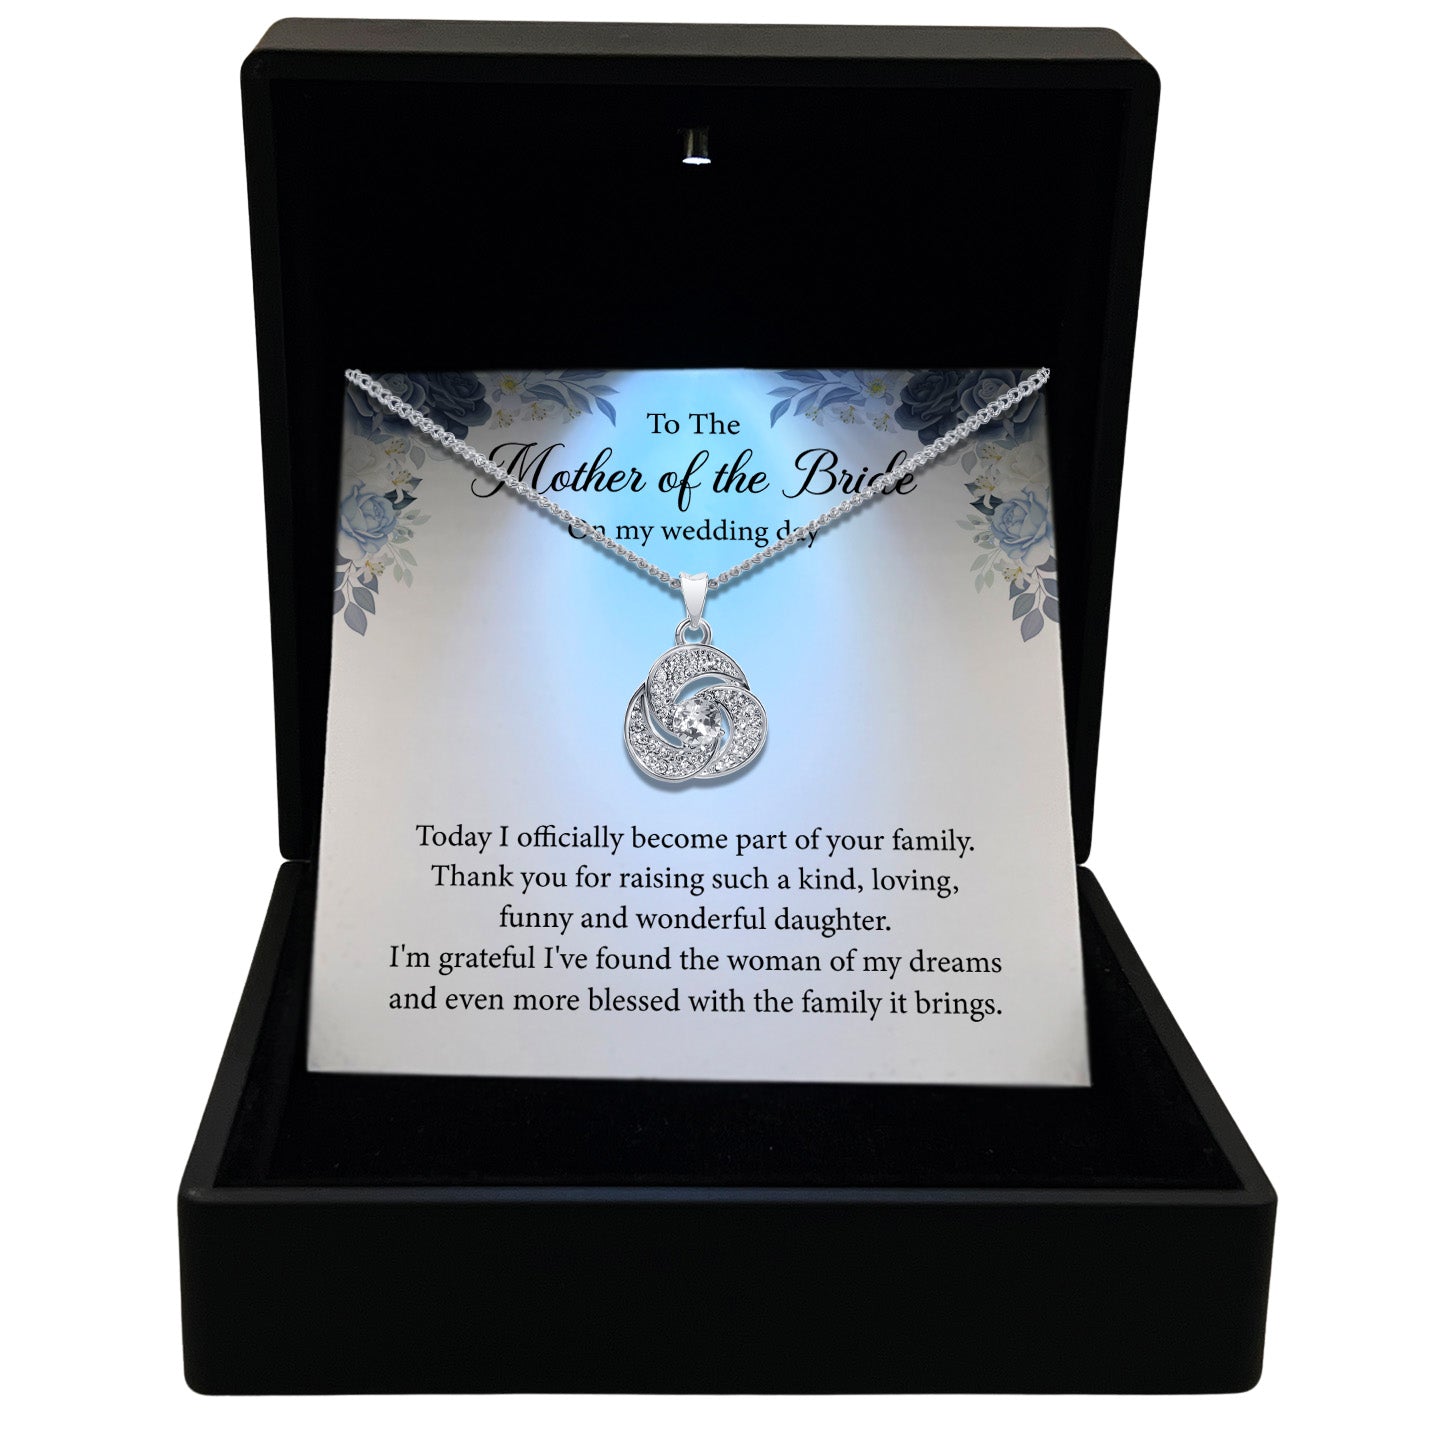 To The Mother of The Bride - Tryndi Love Knot Necklace